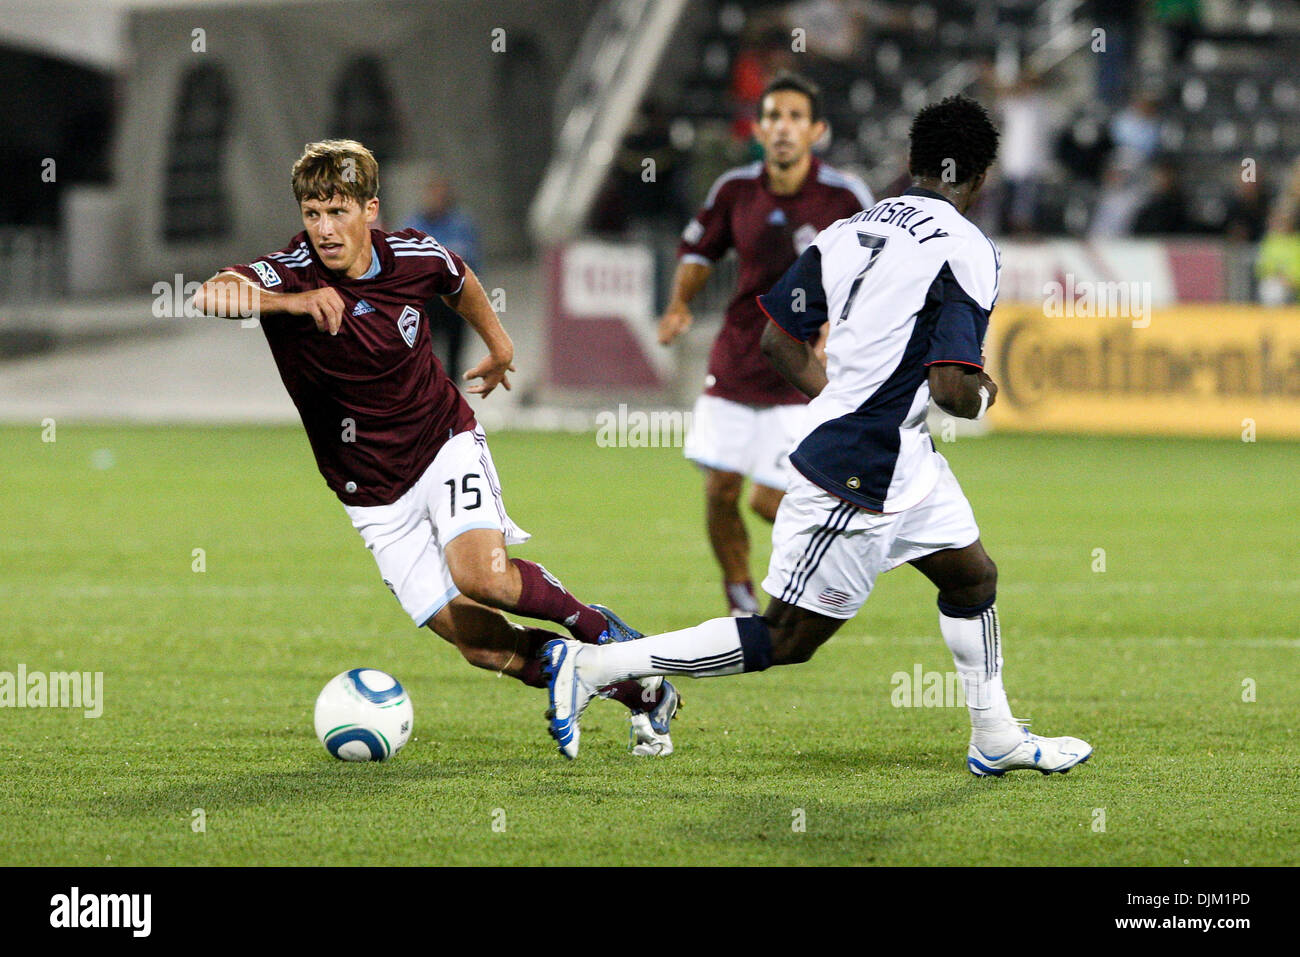 Sept. 18, 2010 - Commerce City, Colorado, United States of America - Wells Thompson of the Rapids (15) dribbles away from Revolution's Kenny Mansally (7) at Dick's Sporting Goods Park in Commerce City, Colorado.  Colorado won the game 3-0. (Credit Image: © Evan Meyer/Southcreek Global/ZUMApress.com) Stock Photo